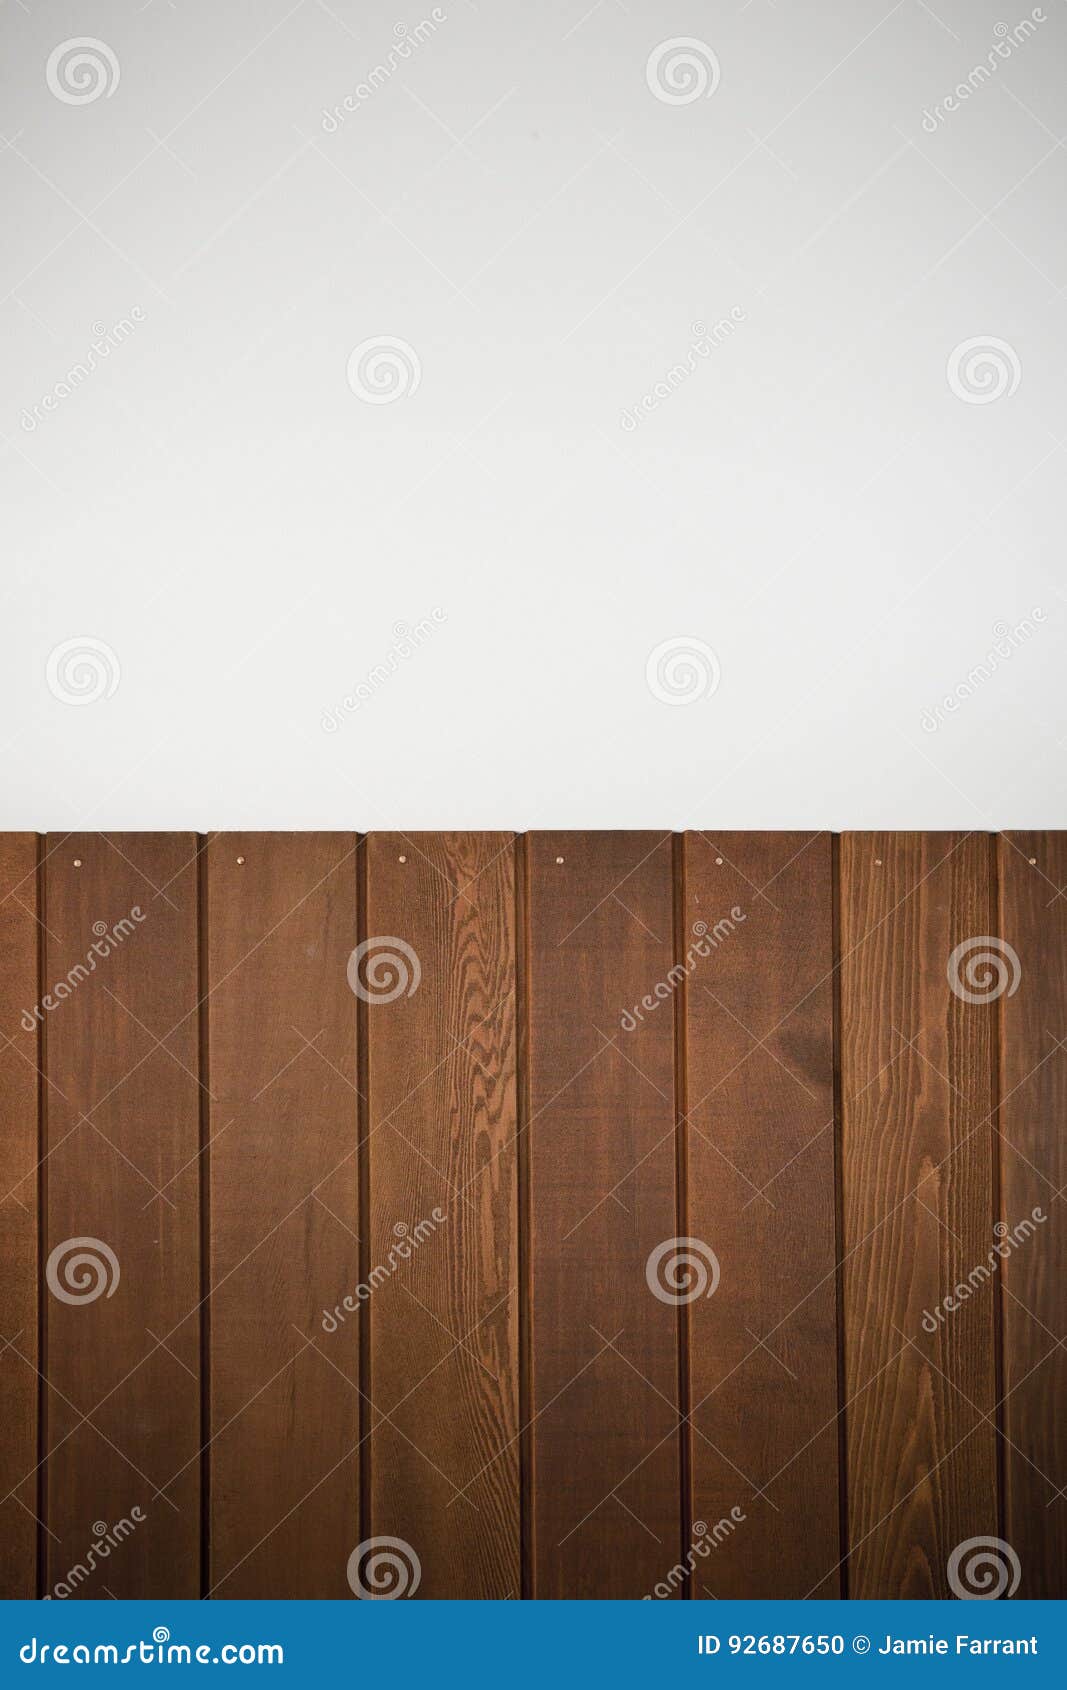 Cedar Wooden Wall Background Stock Photo Image Of Boards